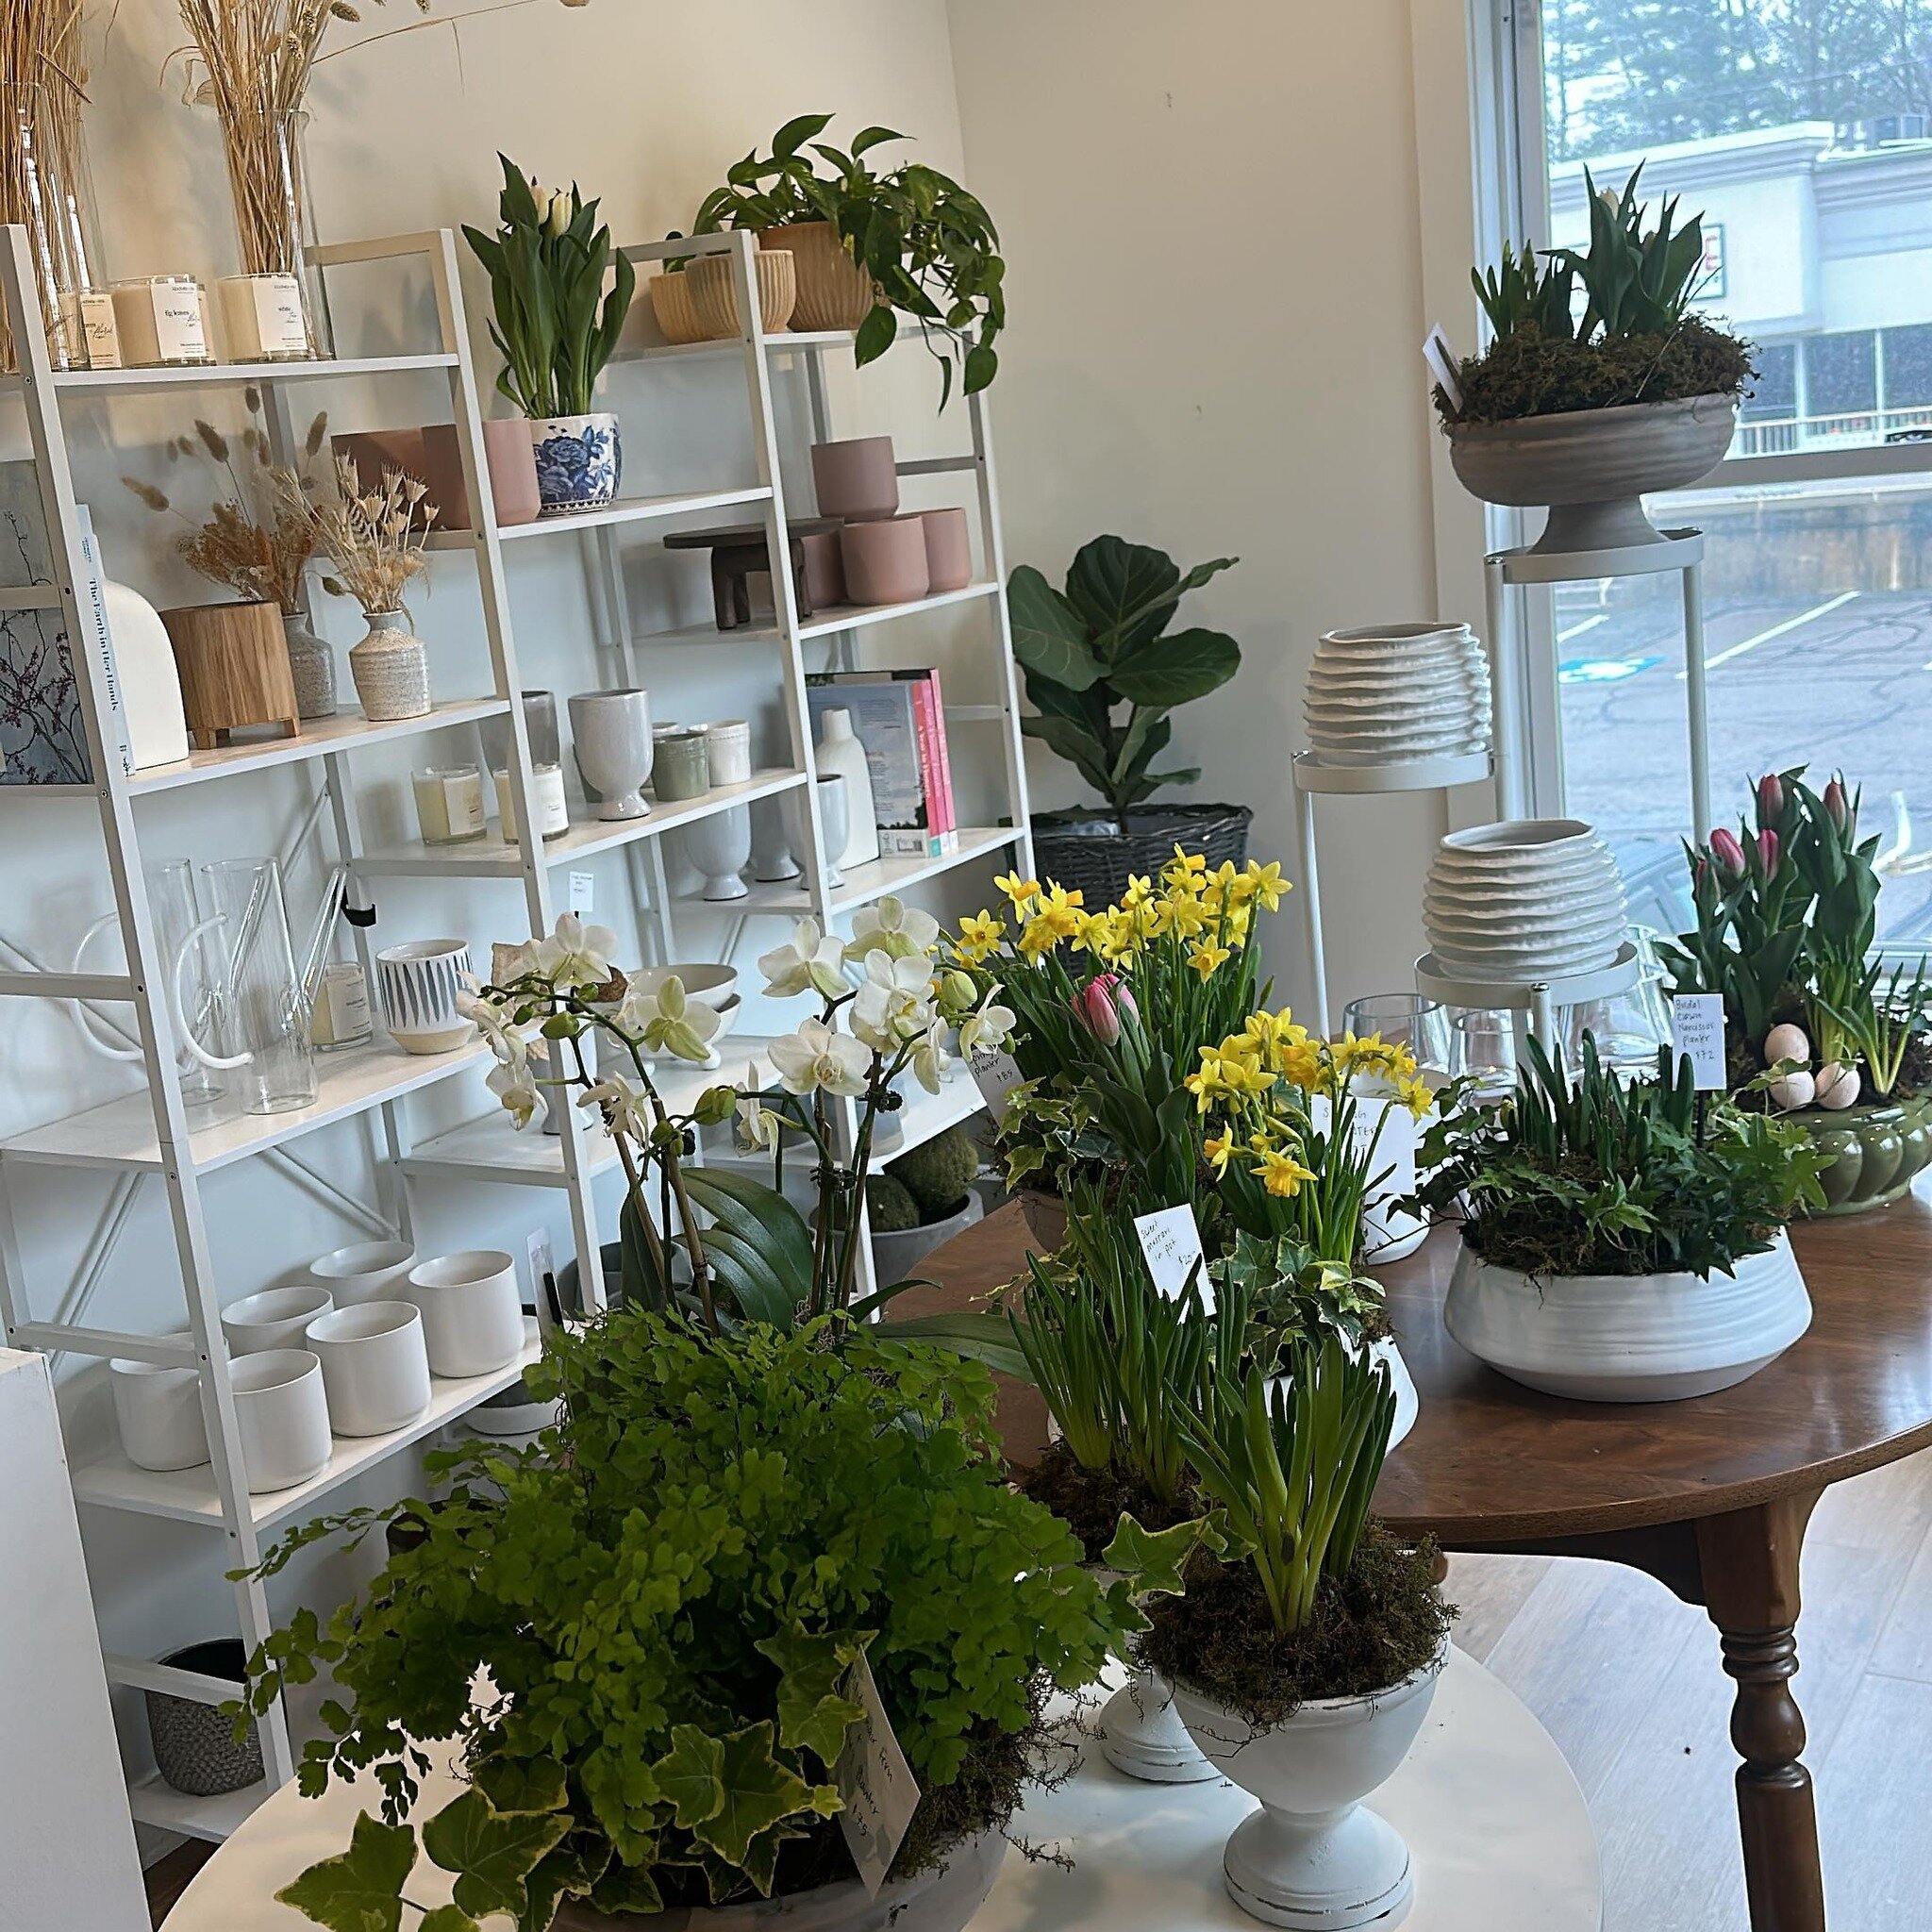 Signs of life back at the shop after taking some time off!  Shop will be open this Thurs, Fri and Sat in time to pick up some cute Easter planters or fresh flowers! 🐰 🐣